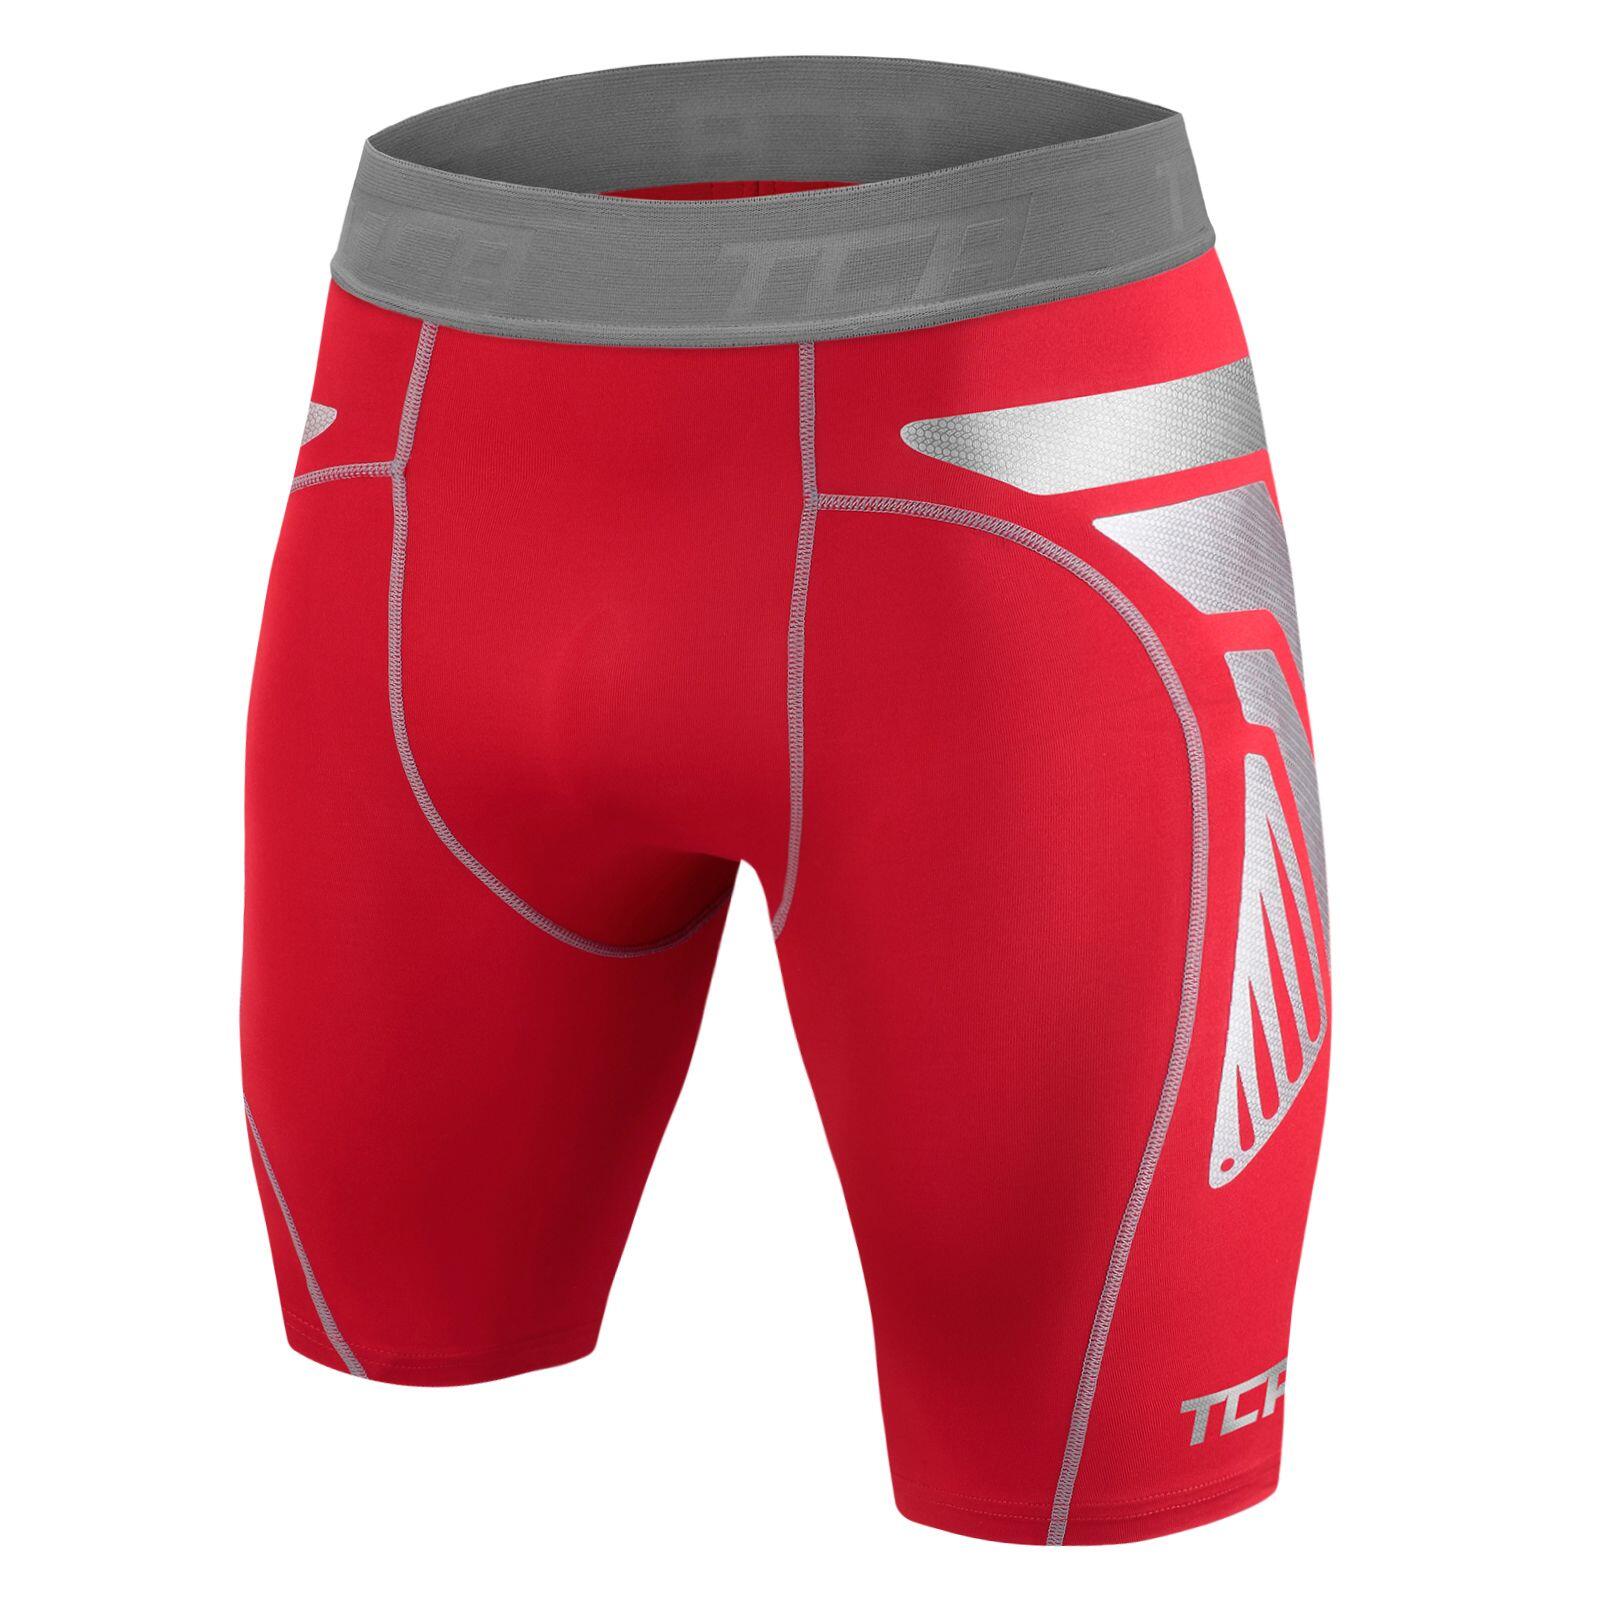 TCA Boys' CarbonForce Quick Dry Base Layer Compression Shorts - Team Red